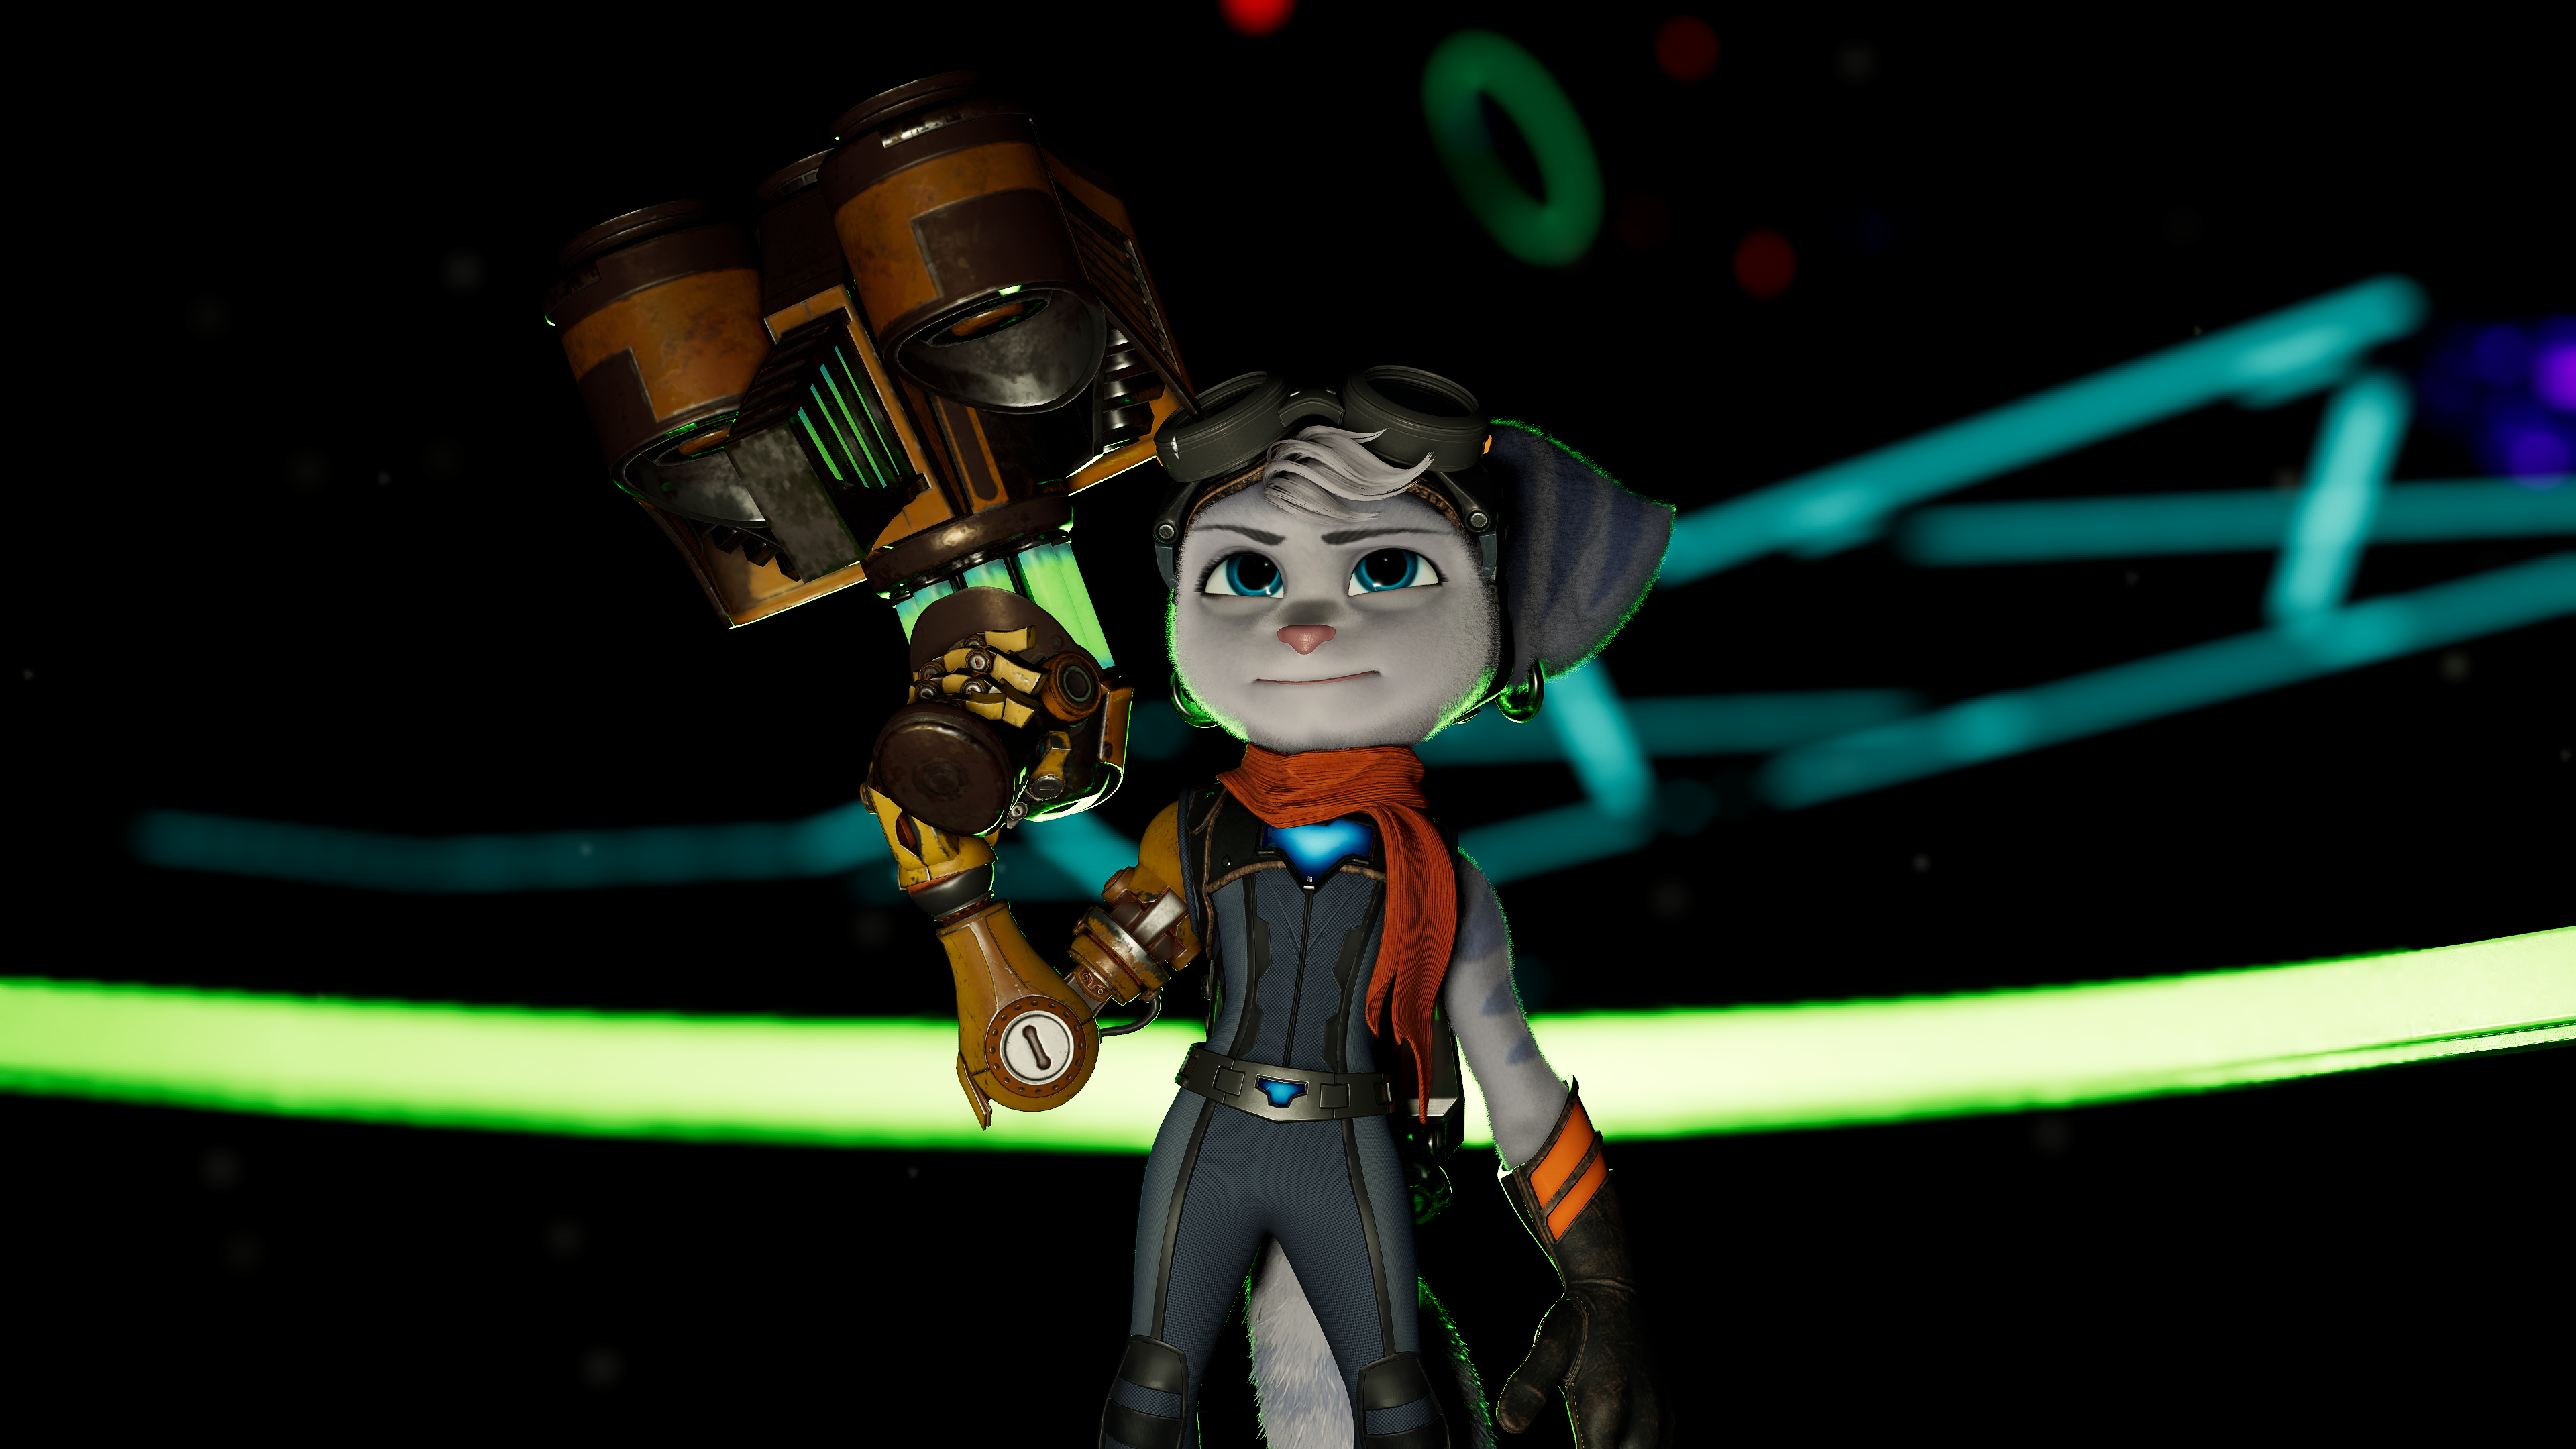 Nvidia RTX Ratchet Clank Rift Apart Sony PlayStation CGi Video Game Art Video Game Characters Video  3840x2160